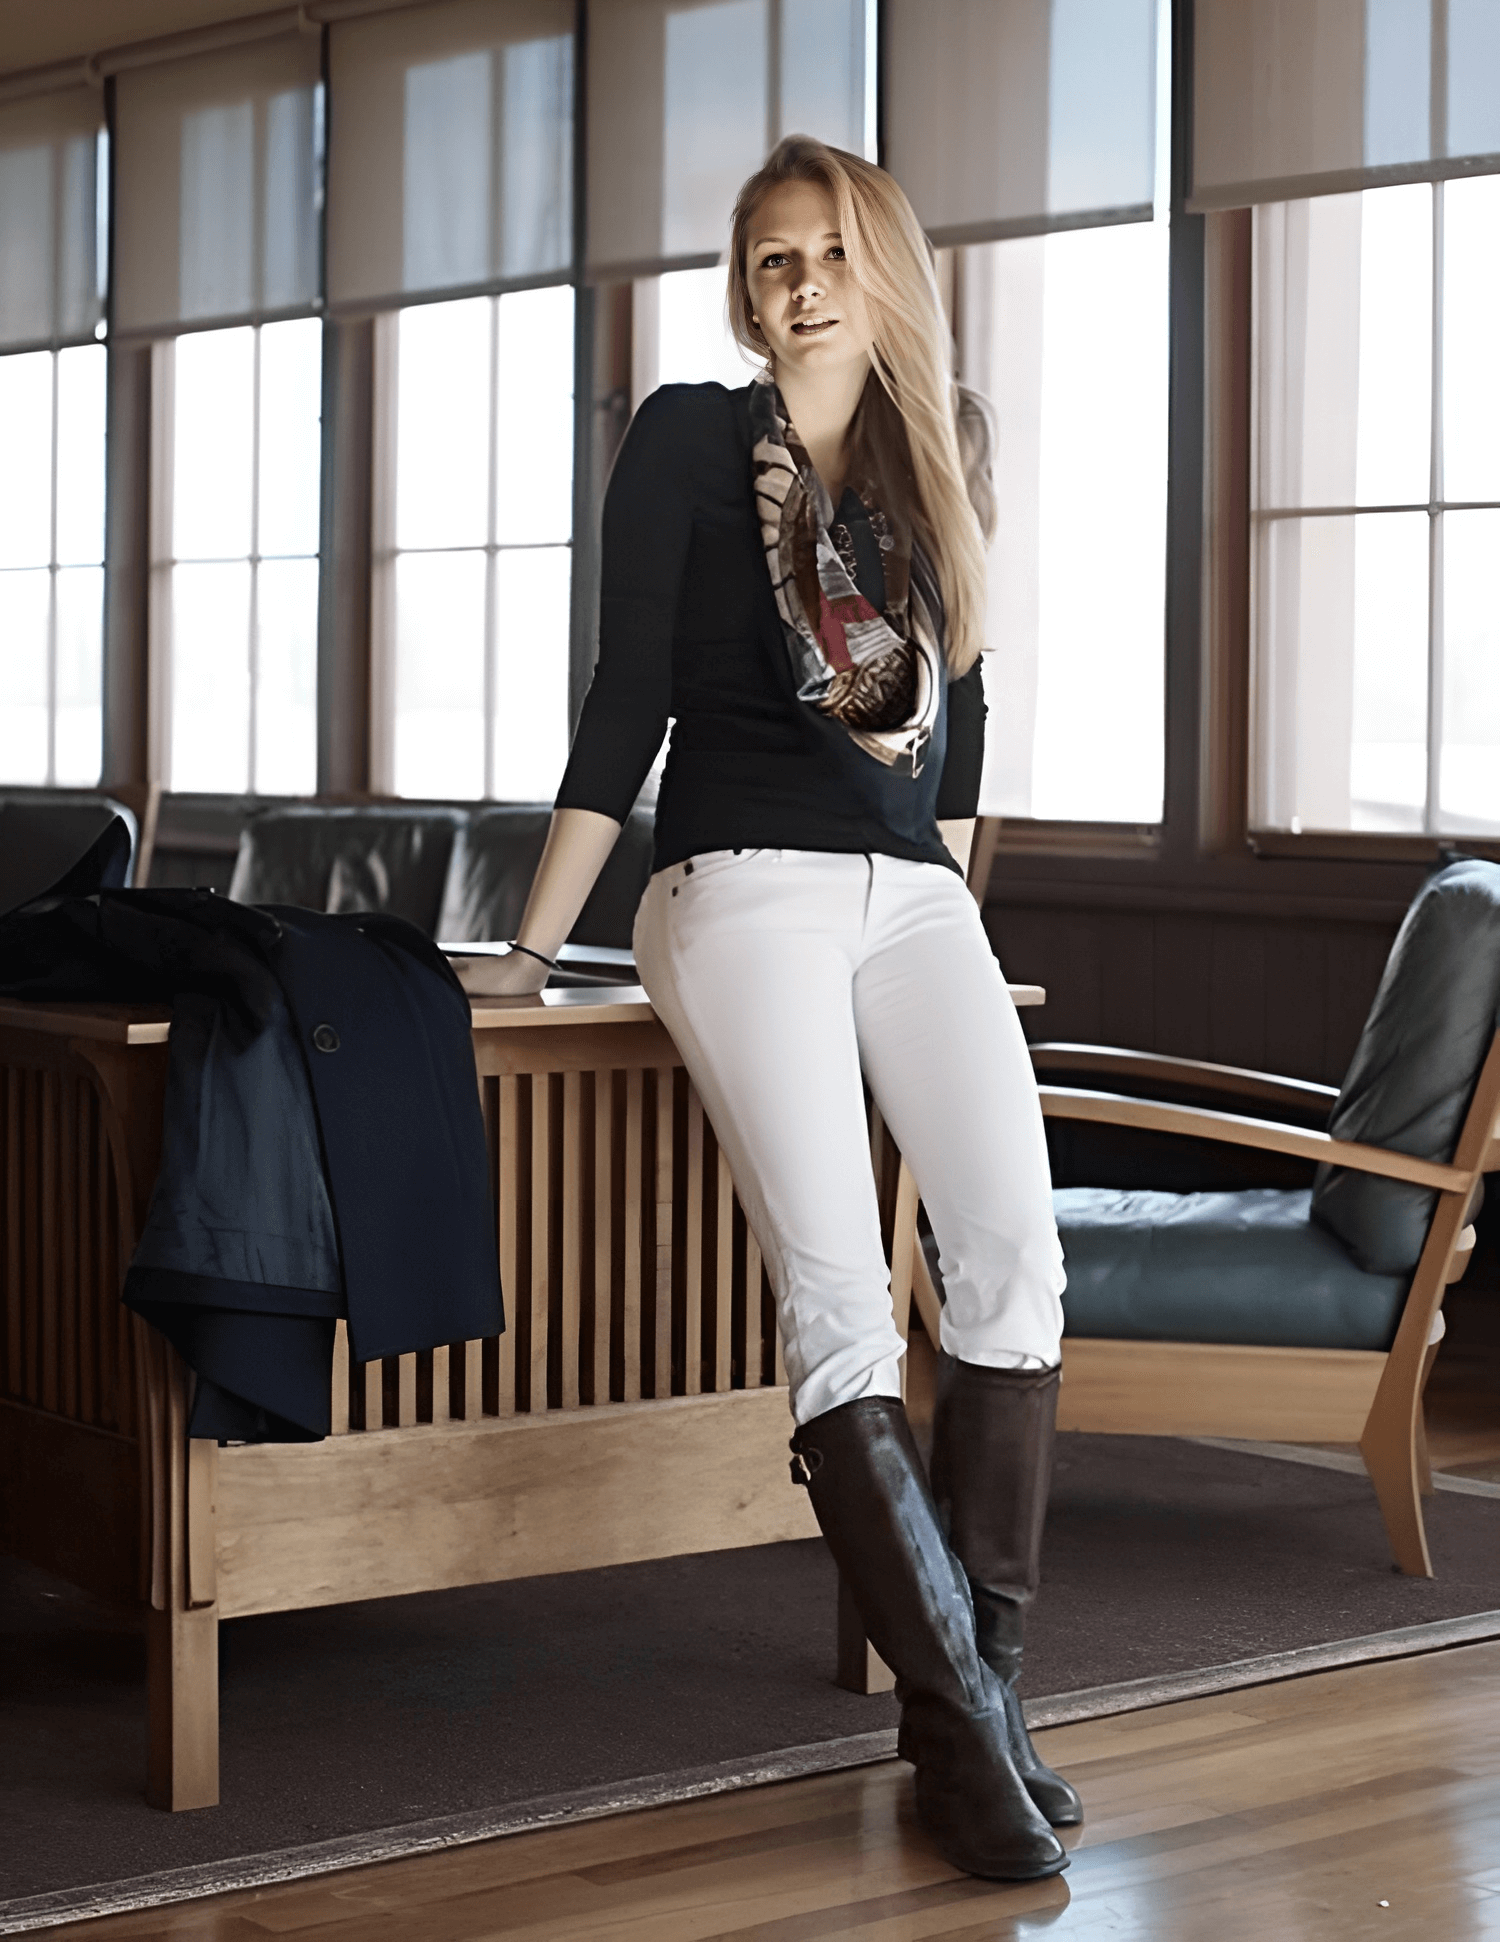 What To Wear Horseback Riding